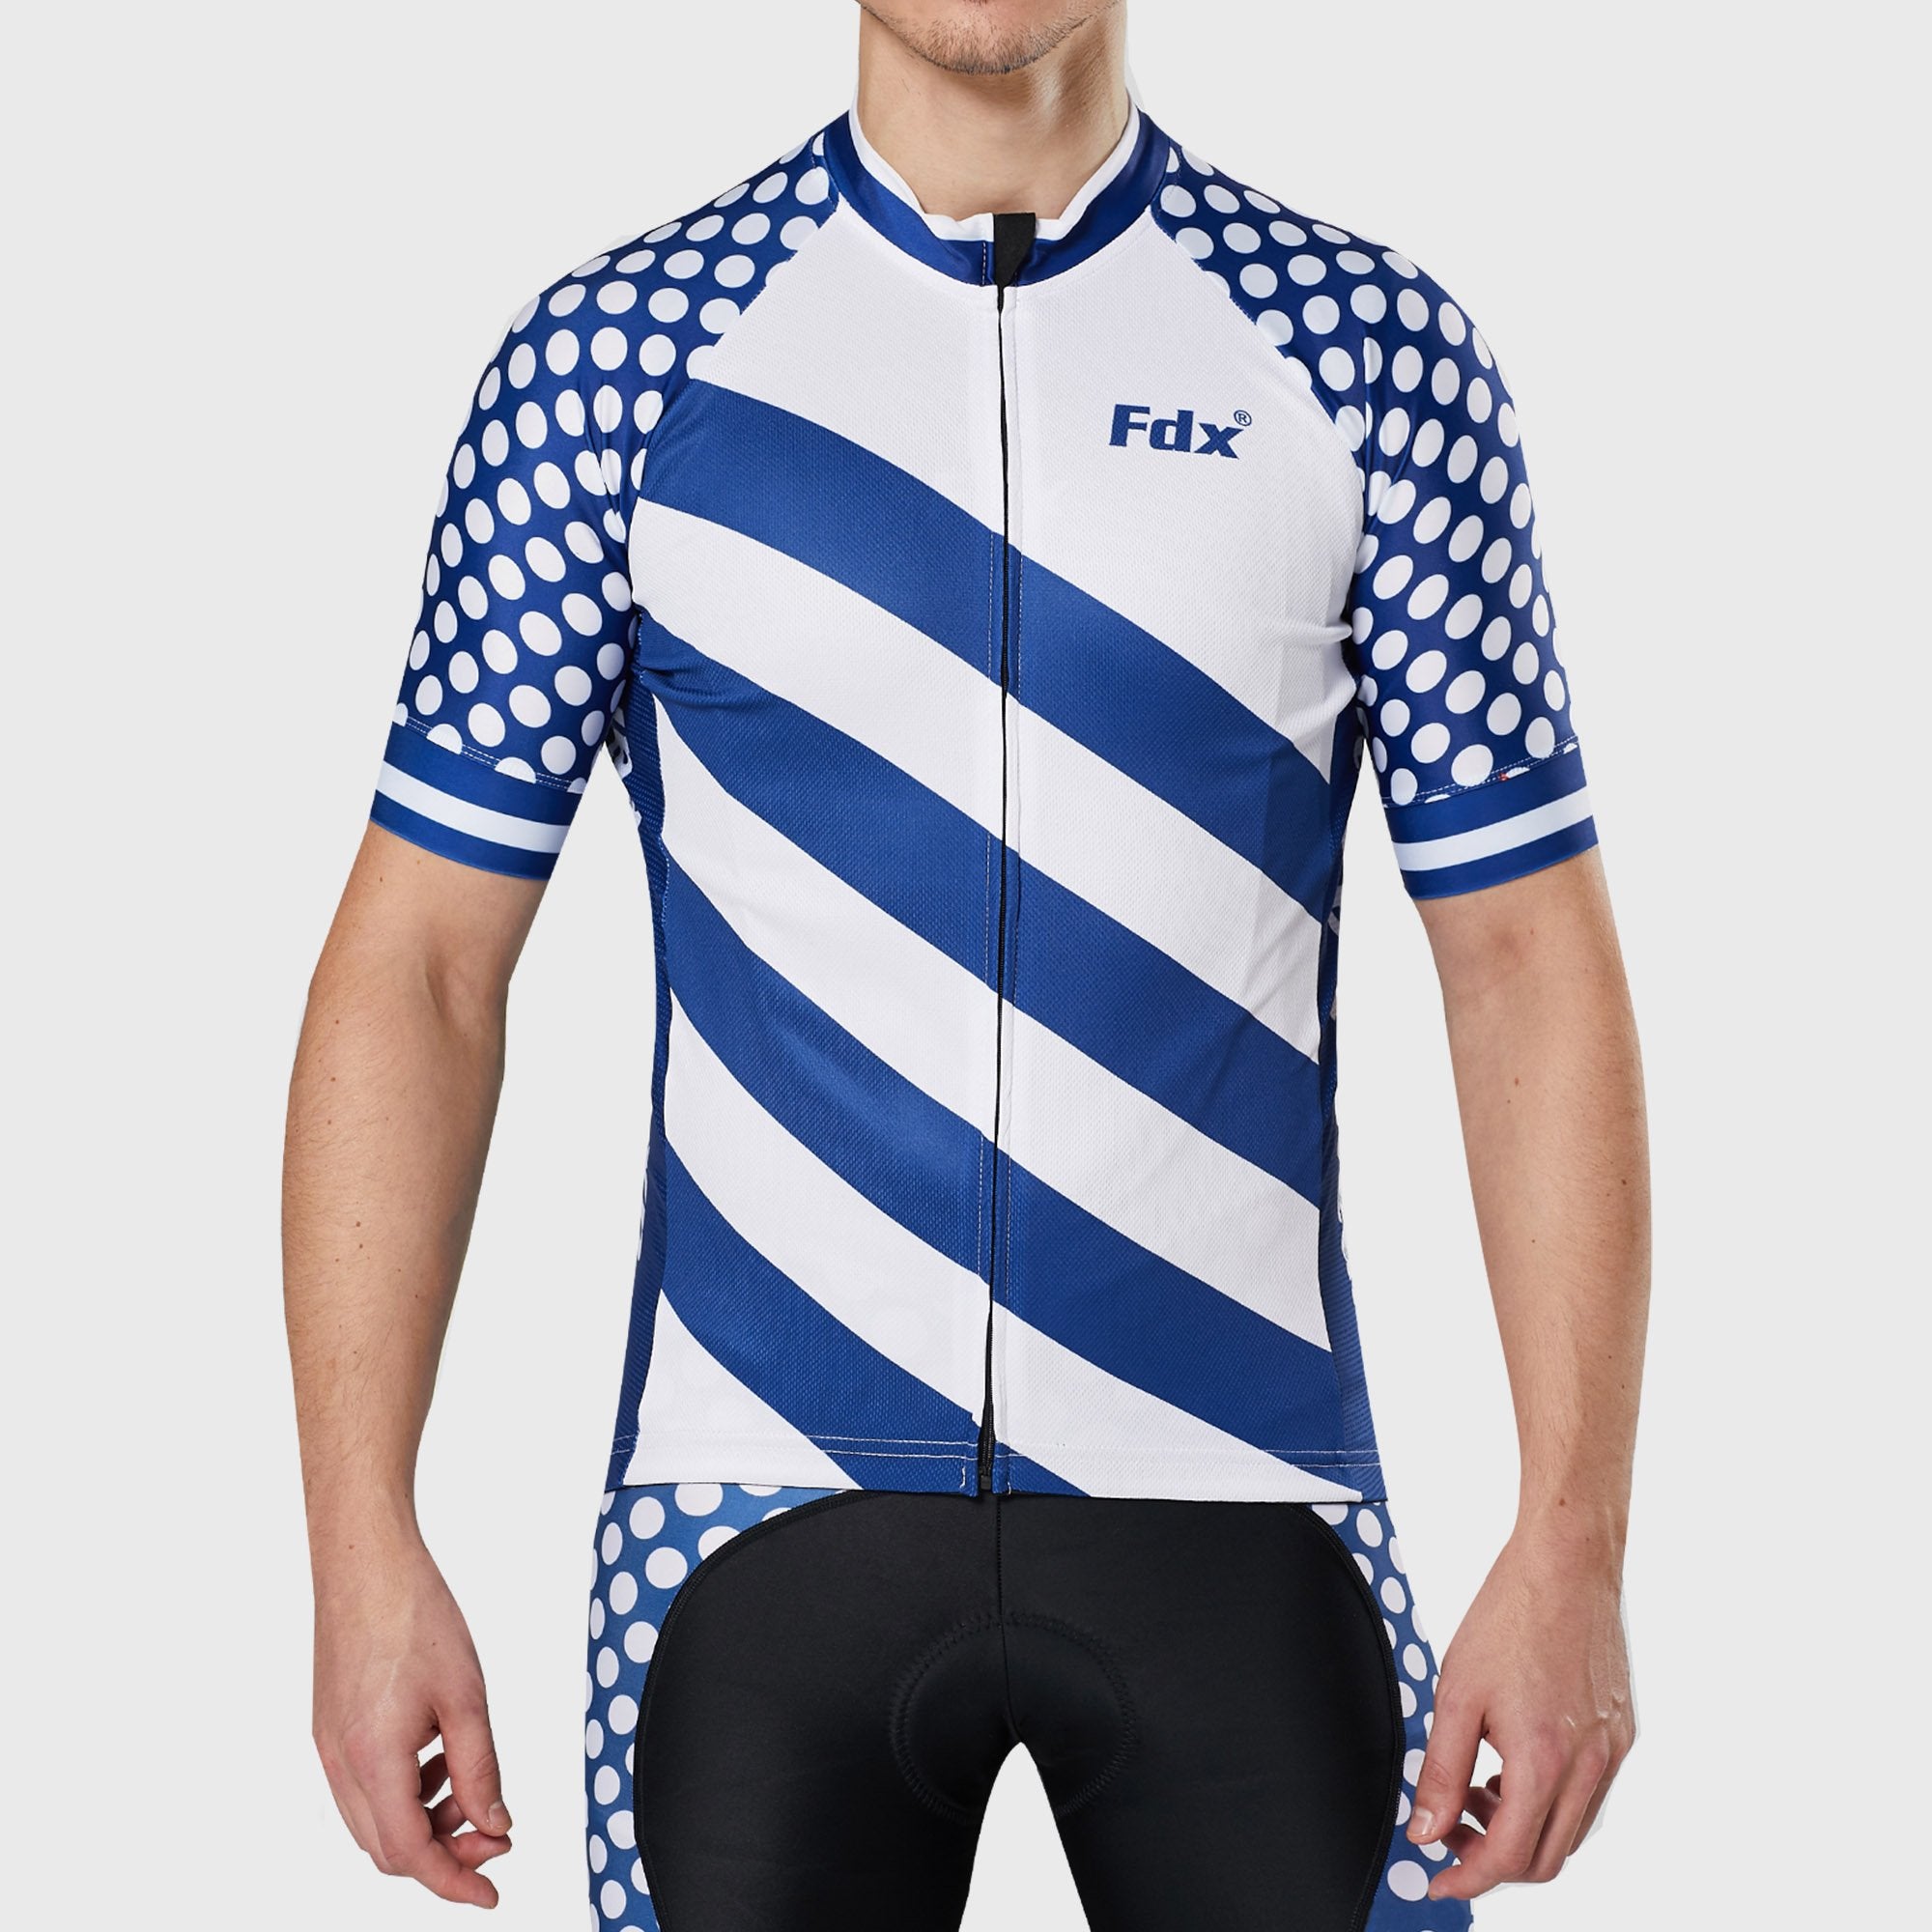 Fdx Equin White Men's Short Sleeve Summer Cycling Jersey